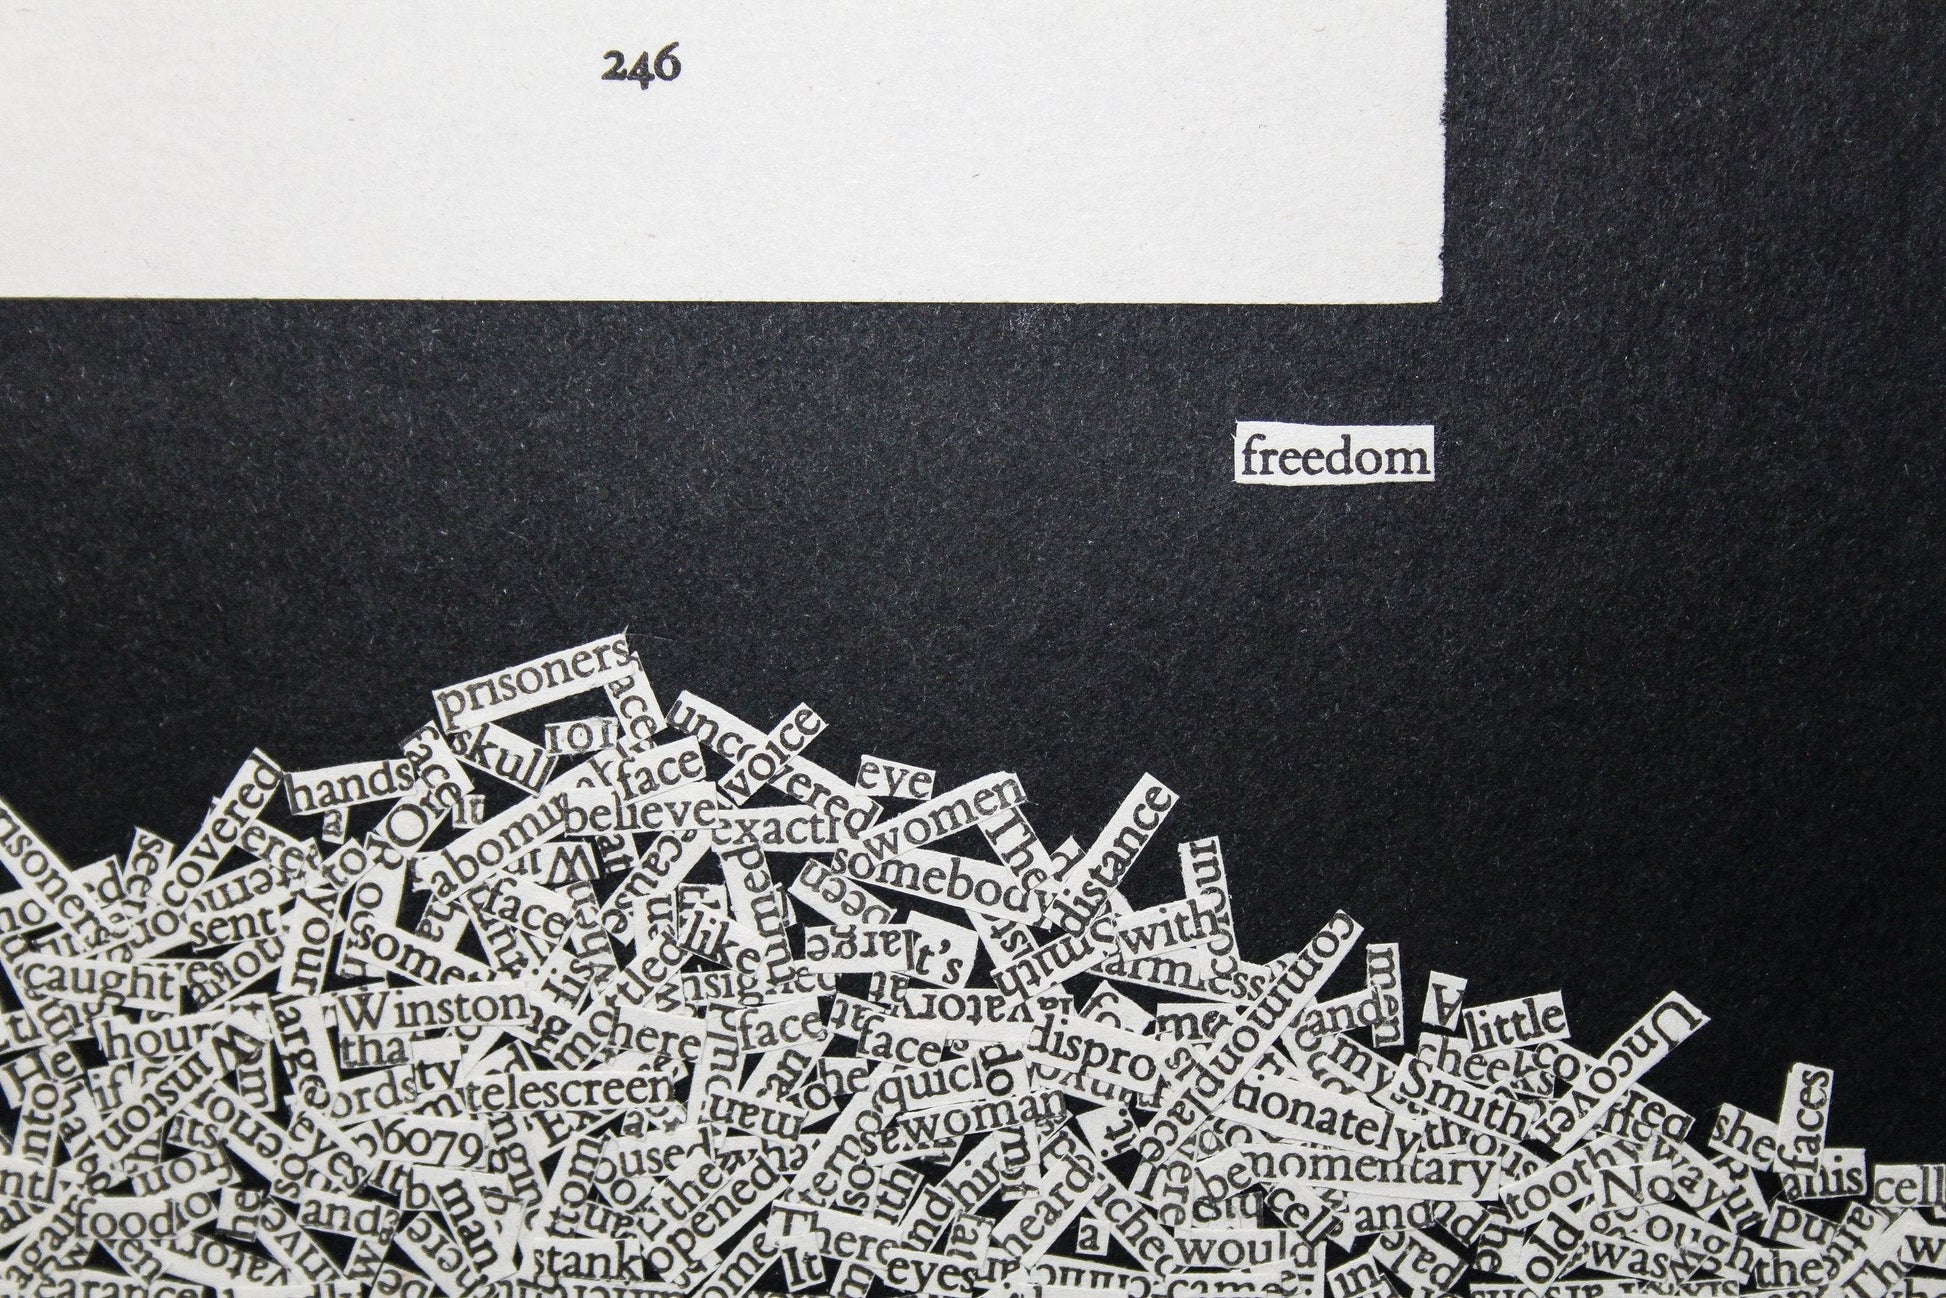 1984 "Freedom 246" | Single Paper Cut | Limied Edition 1 of 1 - James Voce // artist